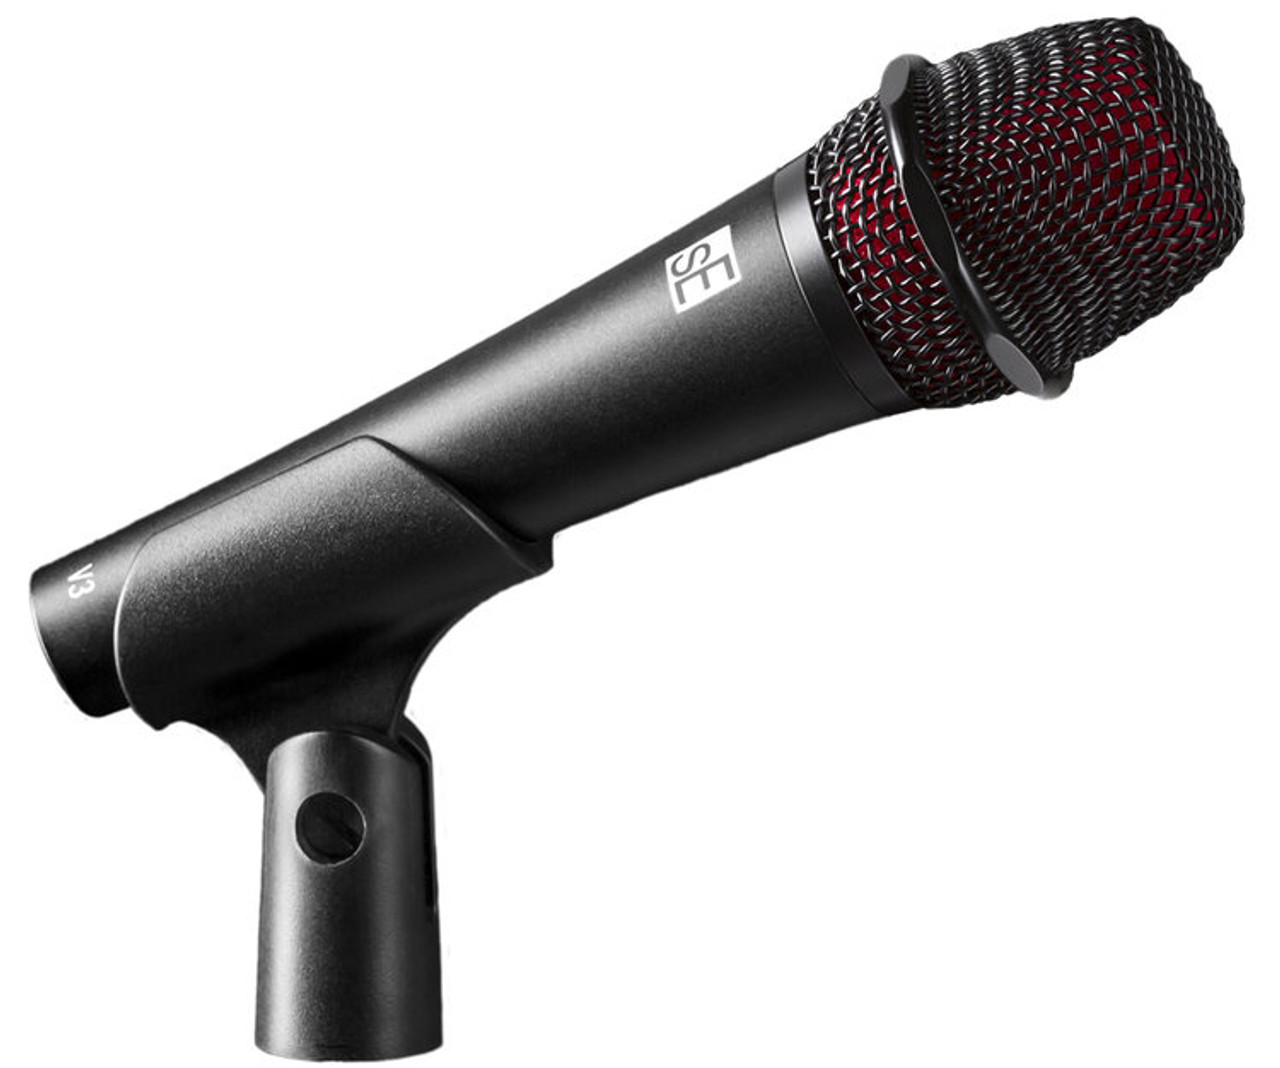 V3 Microphone - SE Electronics All-purpose Handheld Microphone Cardioid